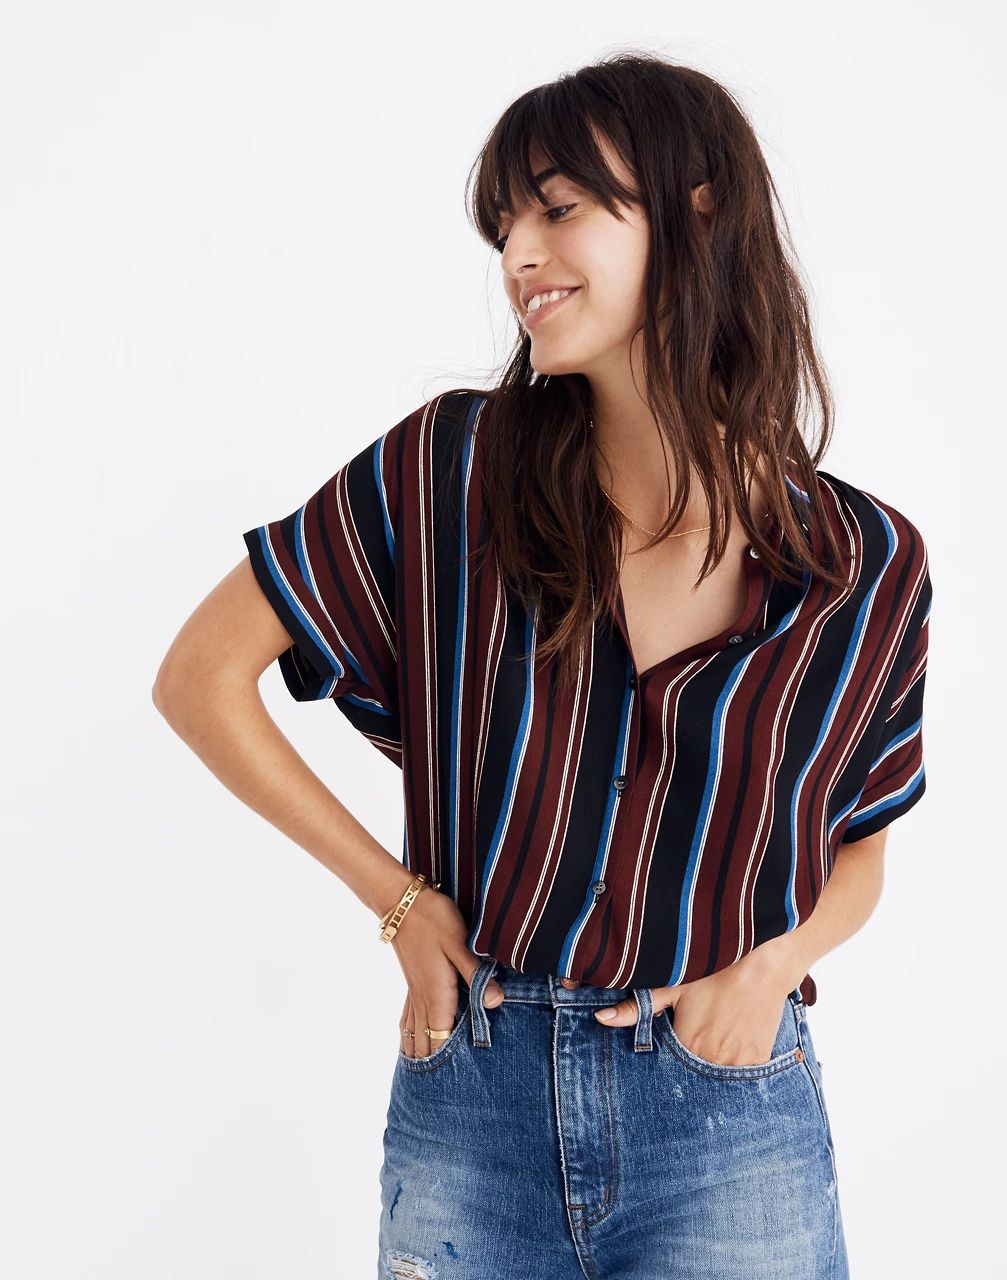 Central Drapey Shirt in Menford Stripe | Madewell